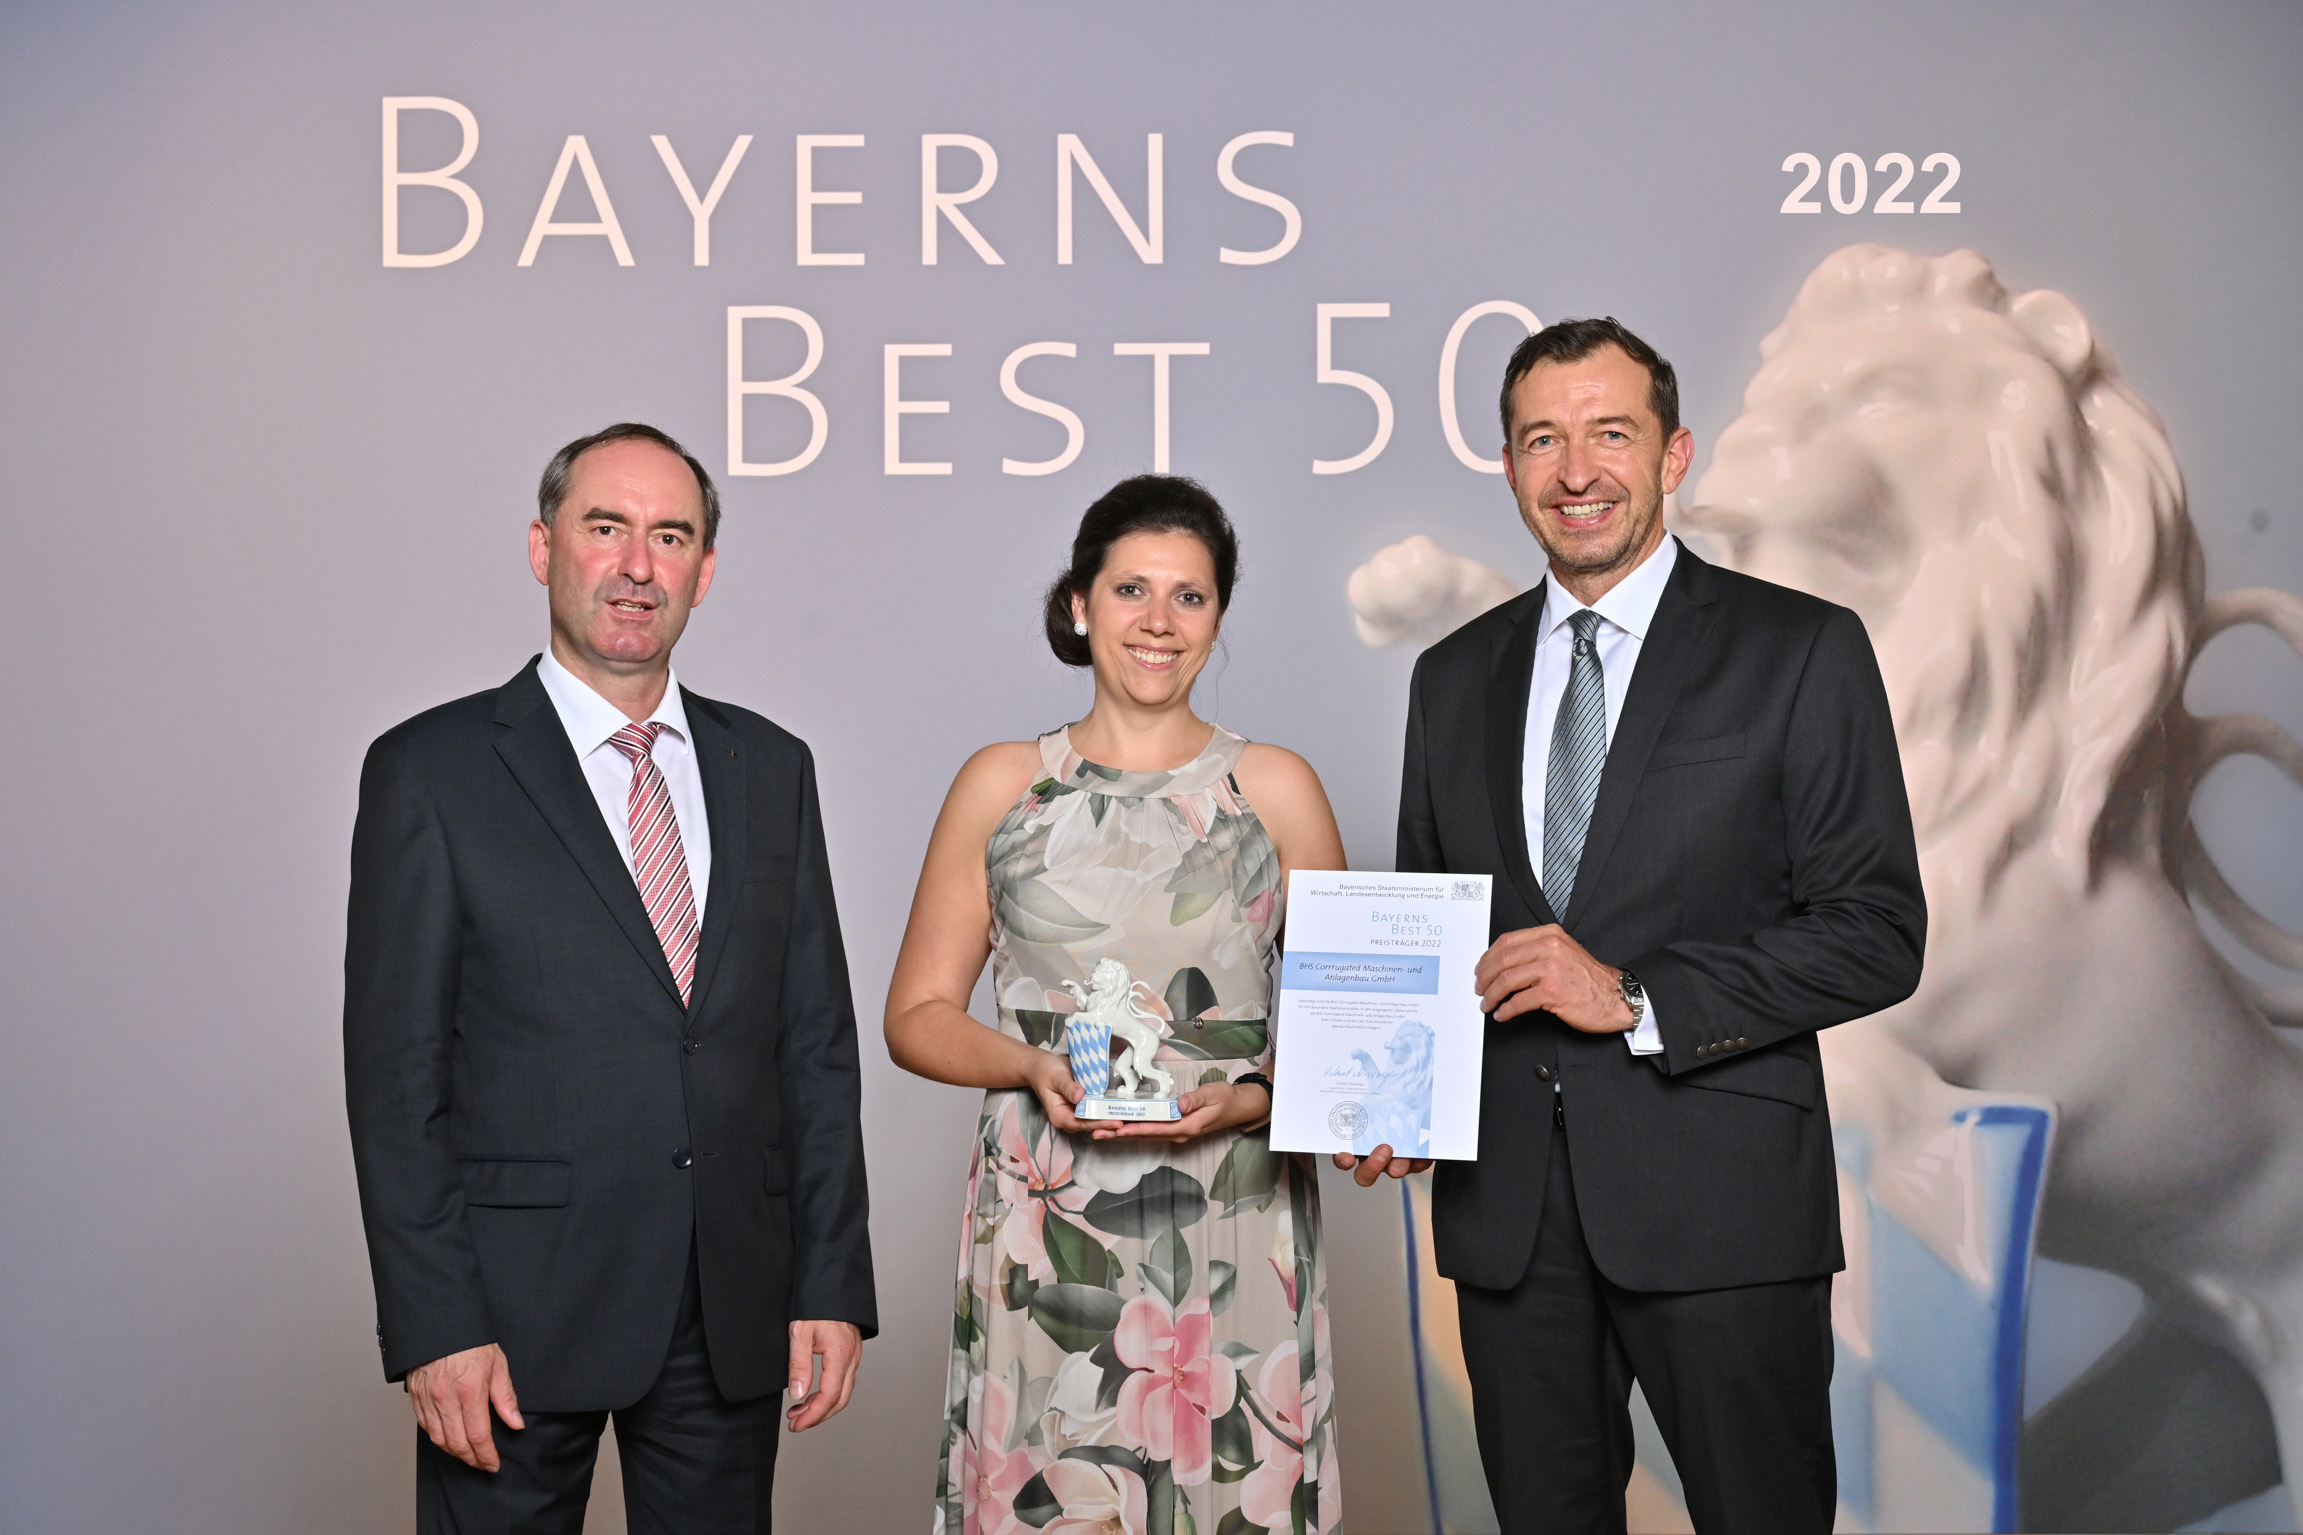 Dominique Ehmann, Manager Corporate Communications, receives the BAYERNS BEST 50 Award 2022.   Source: Studio SX HEUSER